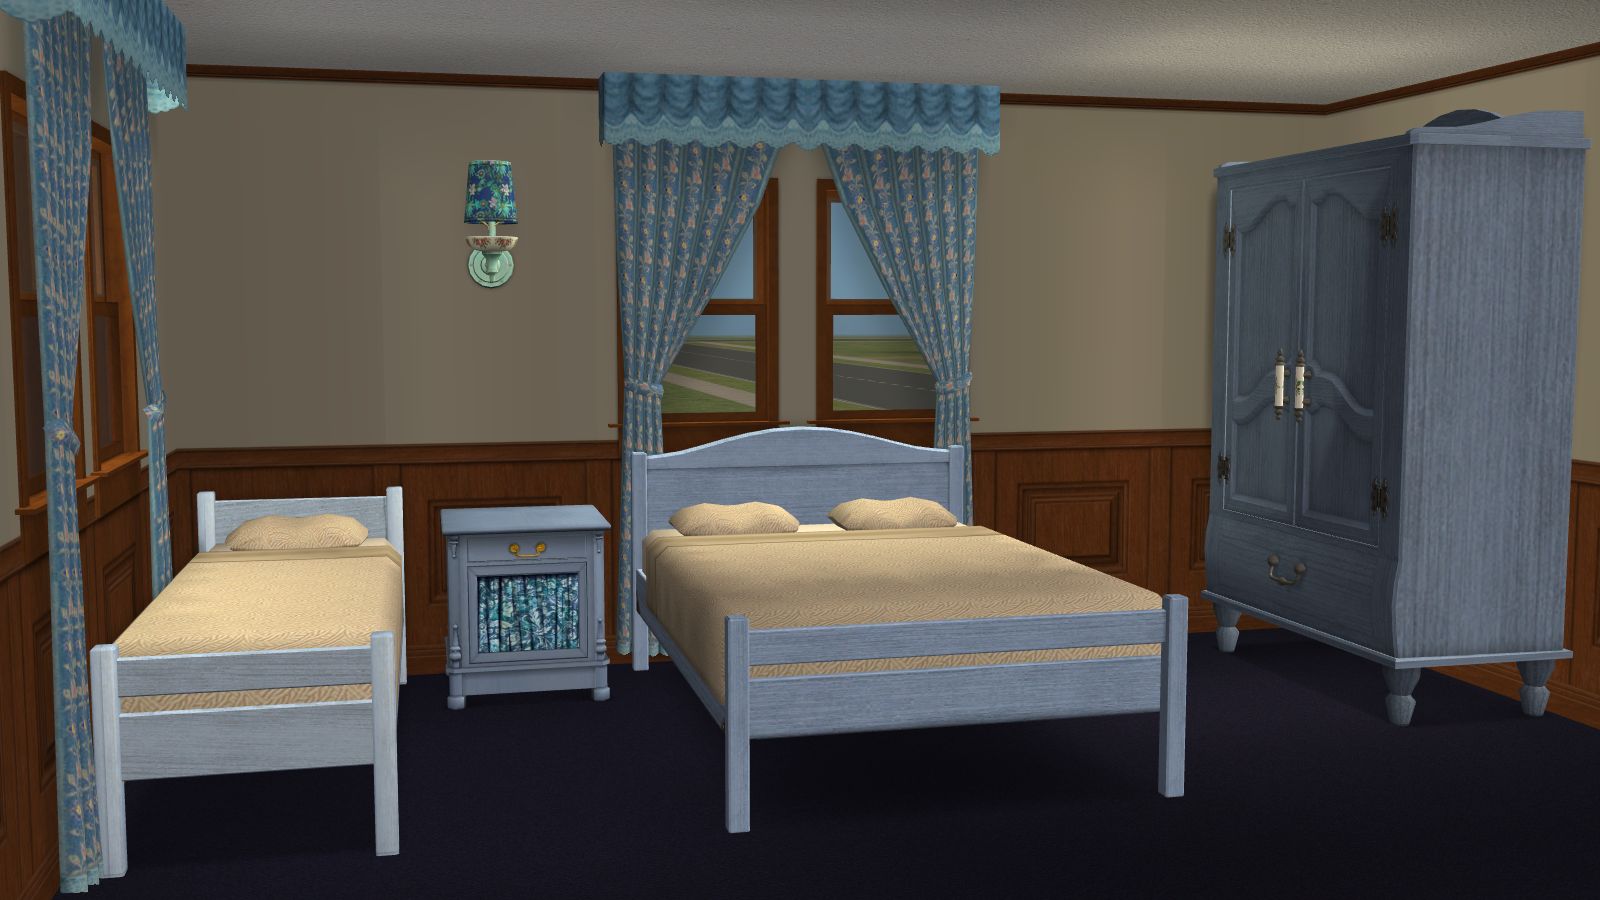 Mod The Sims Recolors Of 2 Base Game Beds Matching Base Game